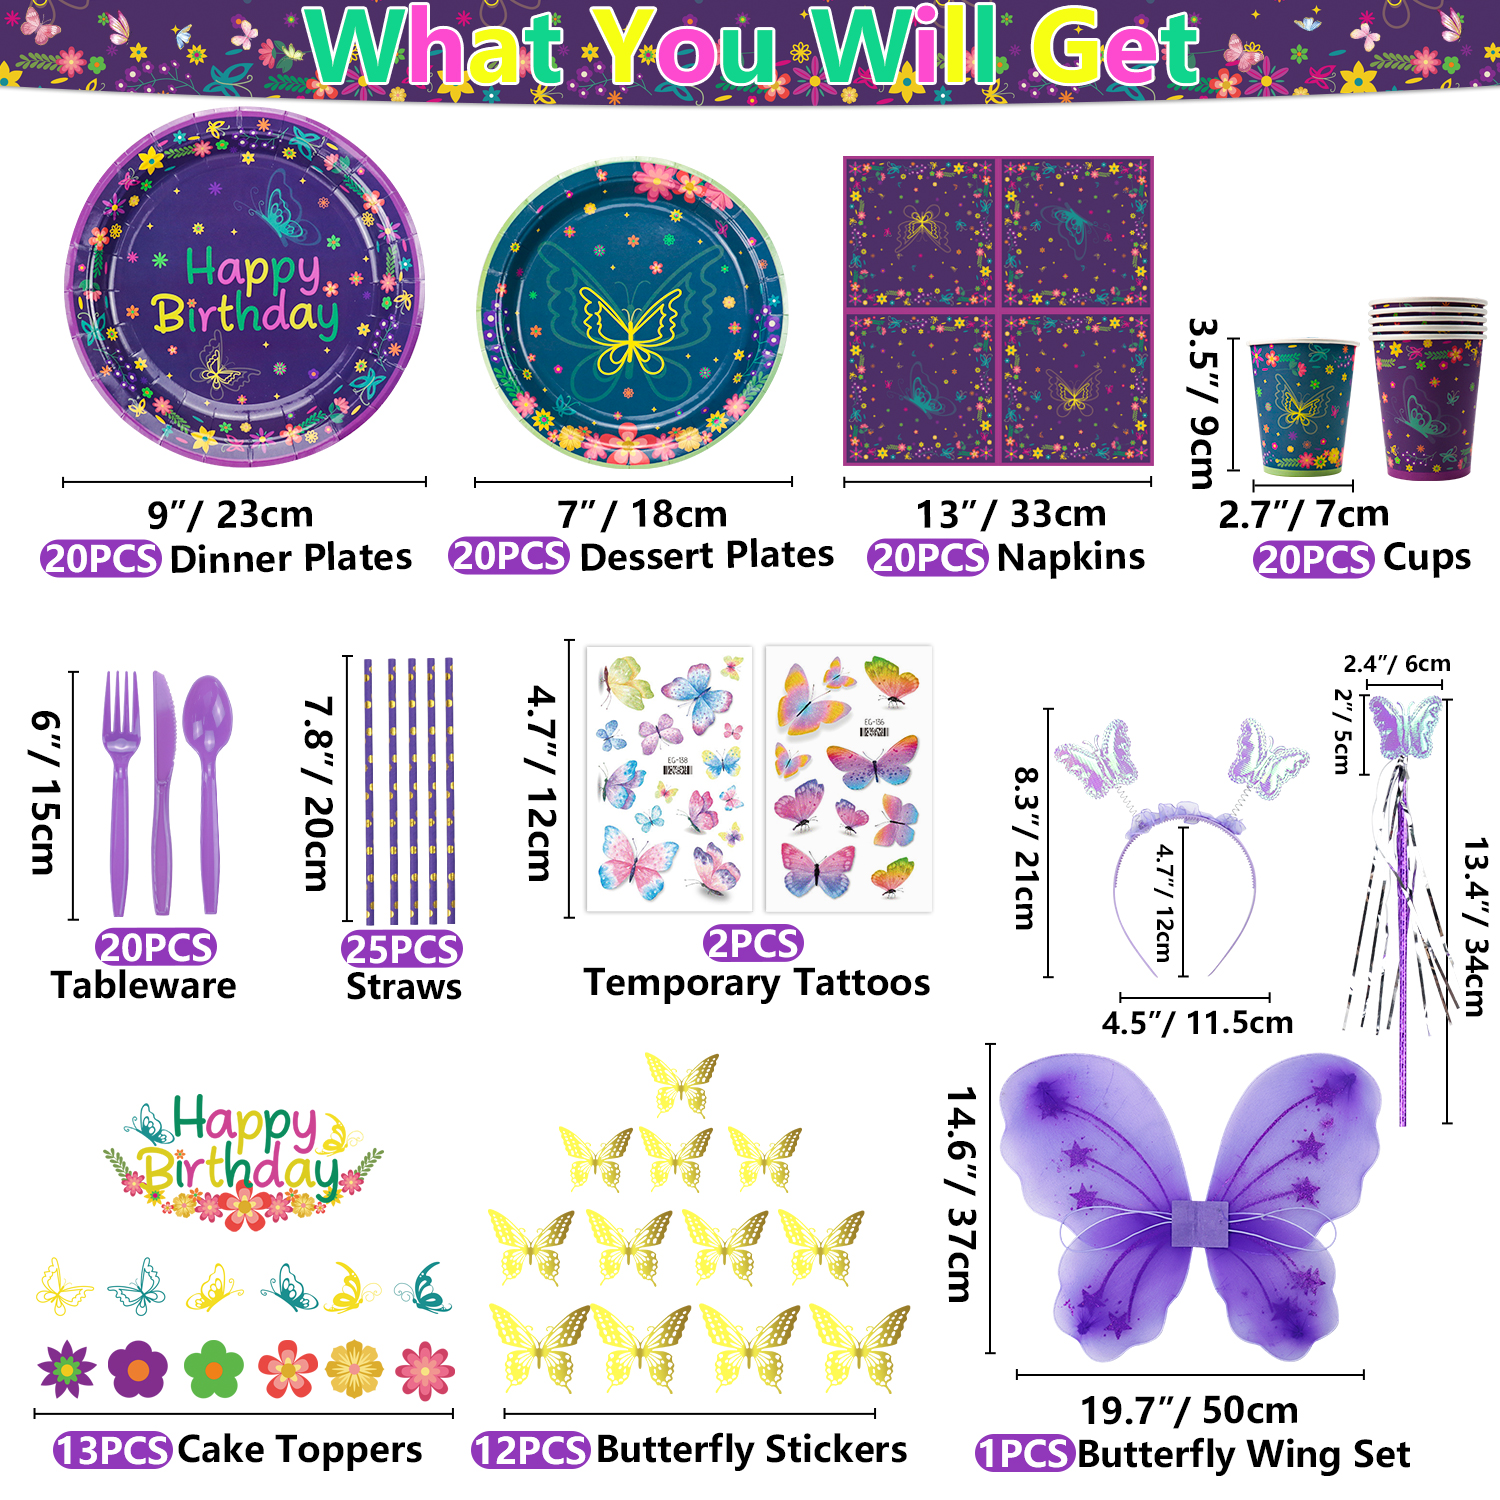 255 Pcs Movie Butterfly Birthday Decorations - Plates, Tablecloth, Balloons, Banner, Temporary Tattoos, Butterfly Stickers, Tableware, Cups, Butterfly Wing Set for Magic Party Supplies - image 2 of 8